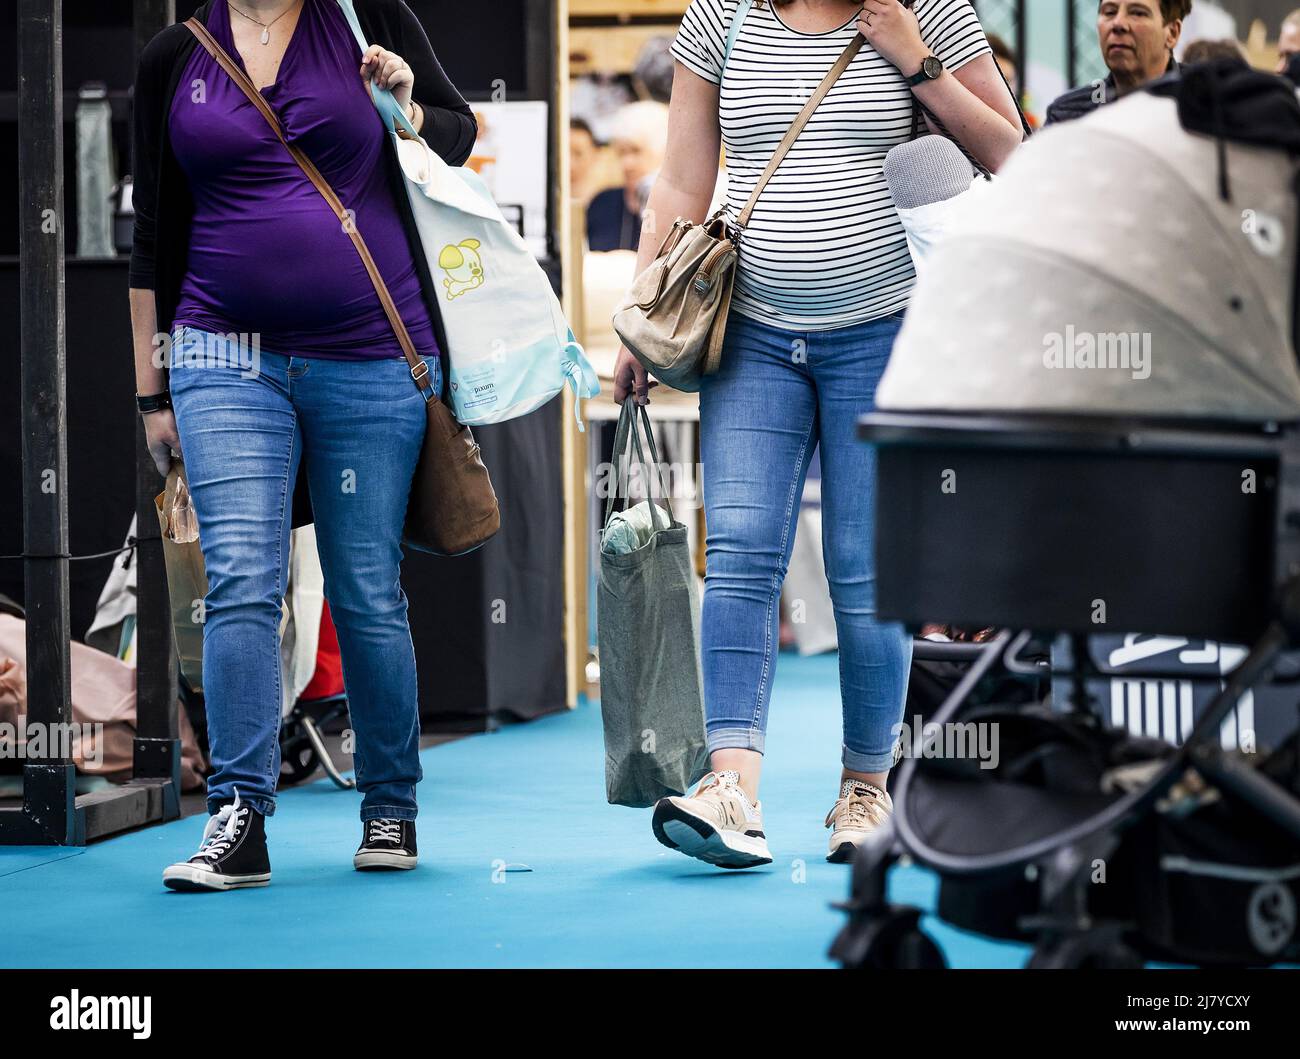 2022-05-11 16:14:11 AMSTERDAM - Visitors on the first day of the Nine Months Fair in the RAI. It is the first time since the outbreak of the corona pandemic that the fair on pregnancy and babies is taking place again. REMKO DE WAAL netherlands out - belgium out Stock Photo